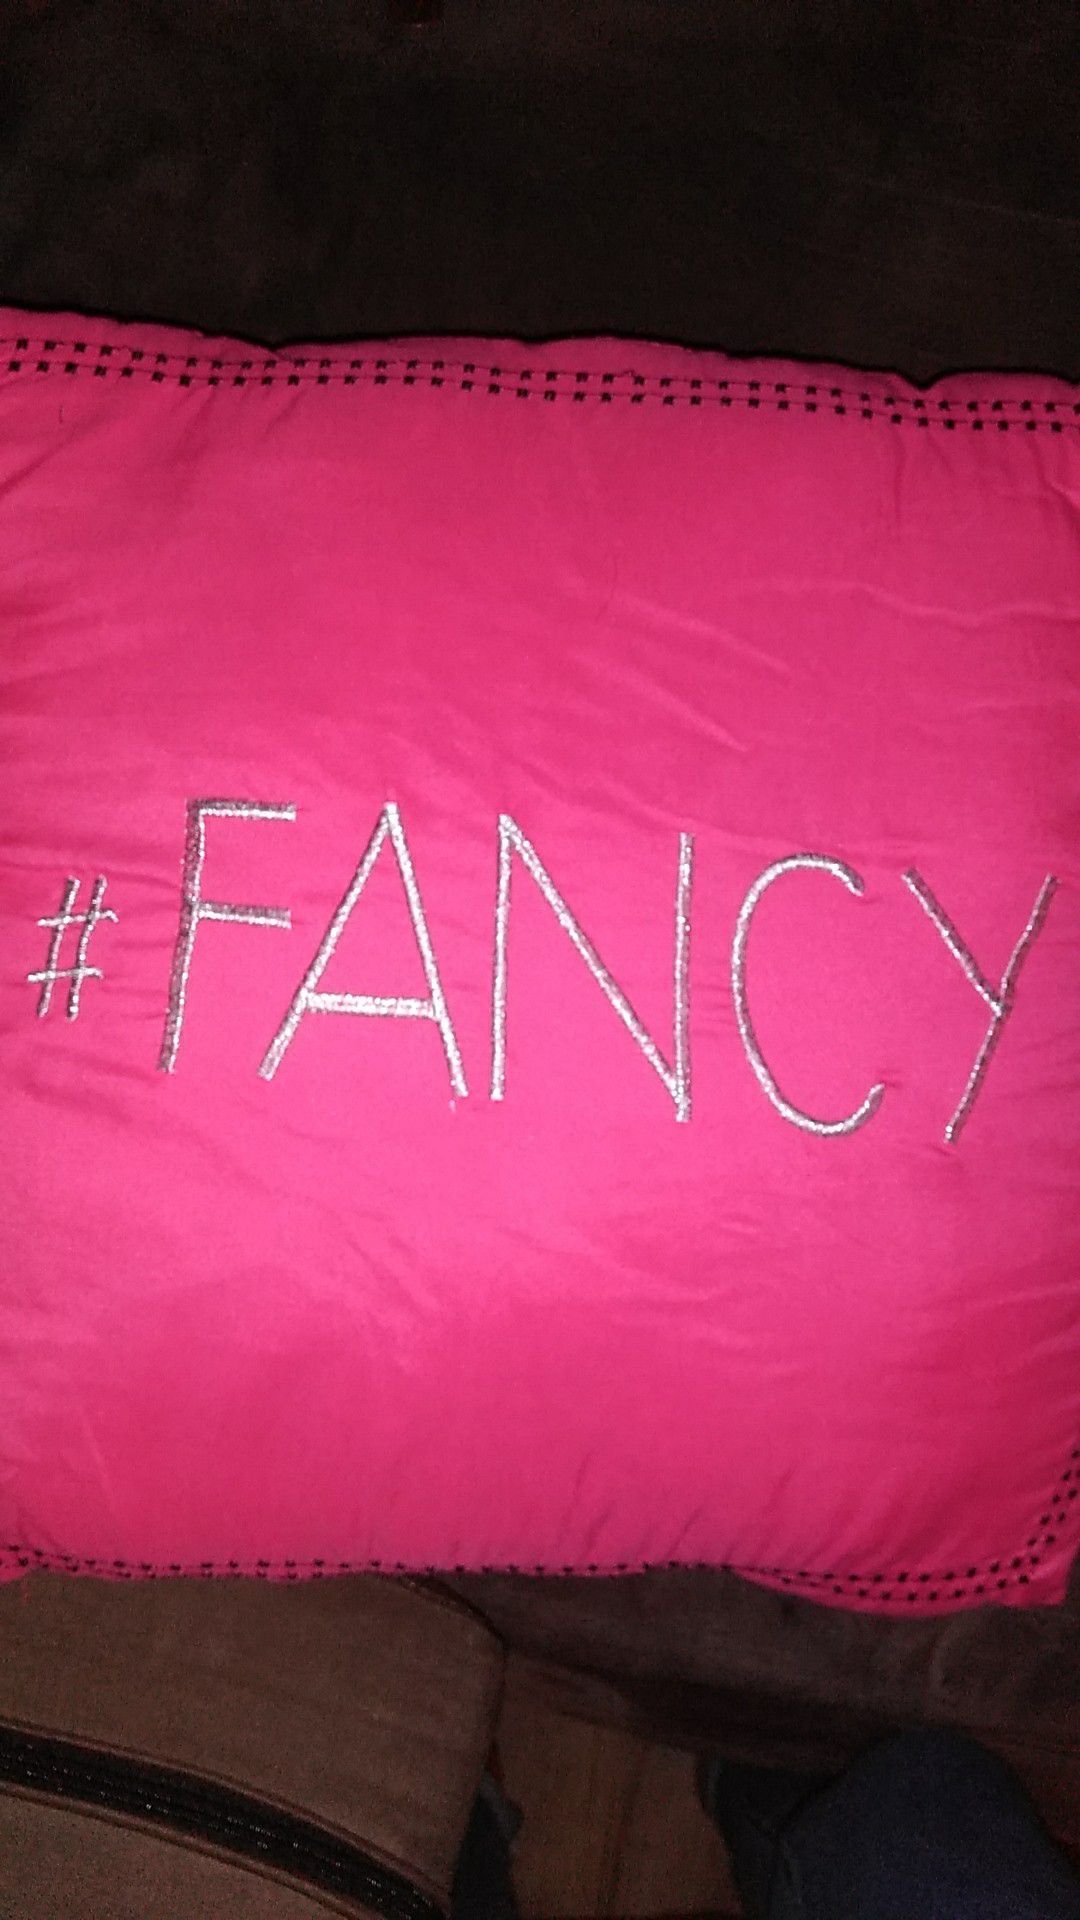 Fancy pink pillow(willing to trade)